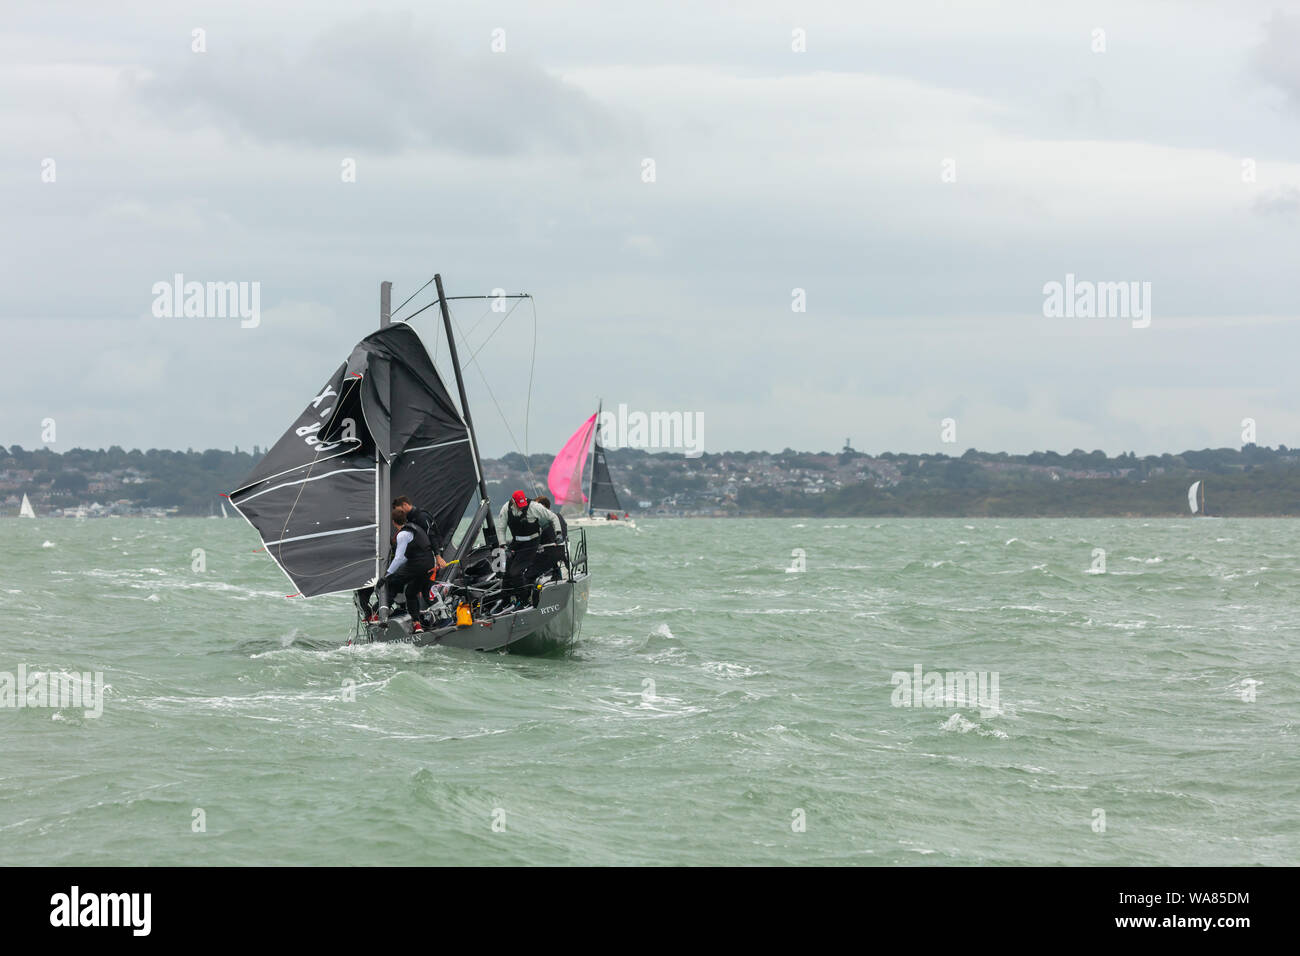 The Solent, Hampshire, UK; 16th August 2019; Crew Attempt Repairs on a dismasted Yacht Stock Photo